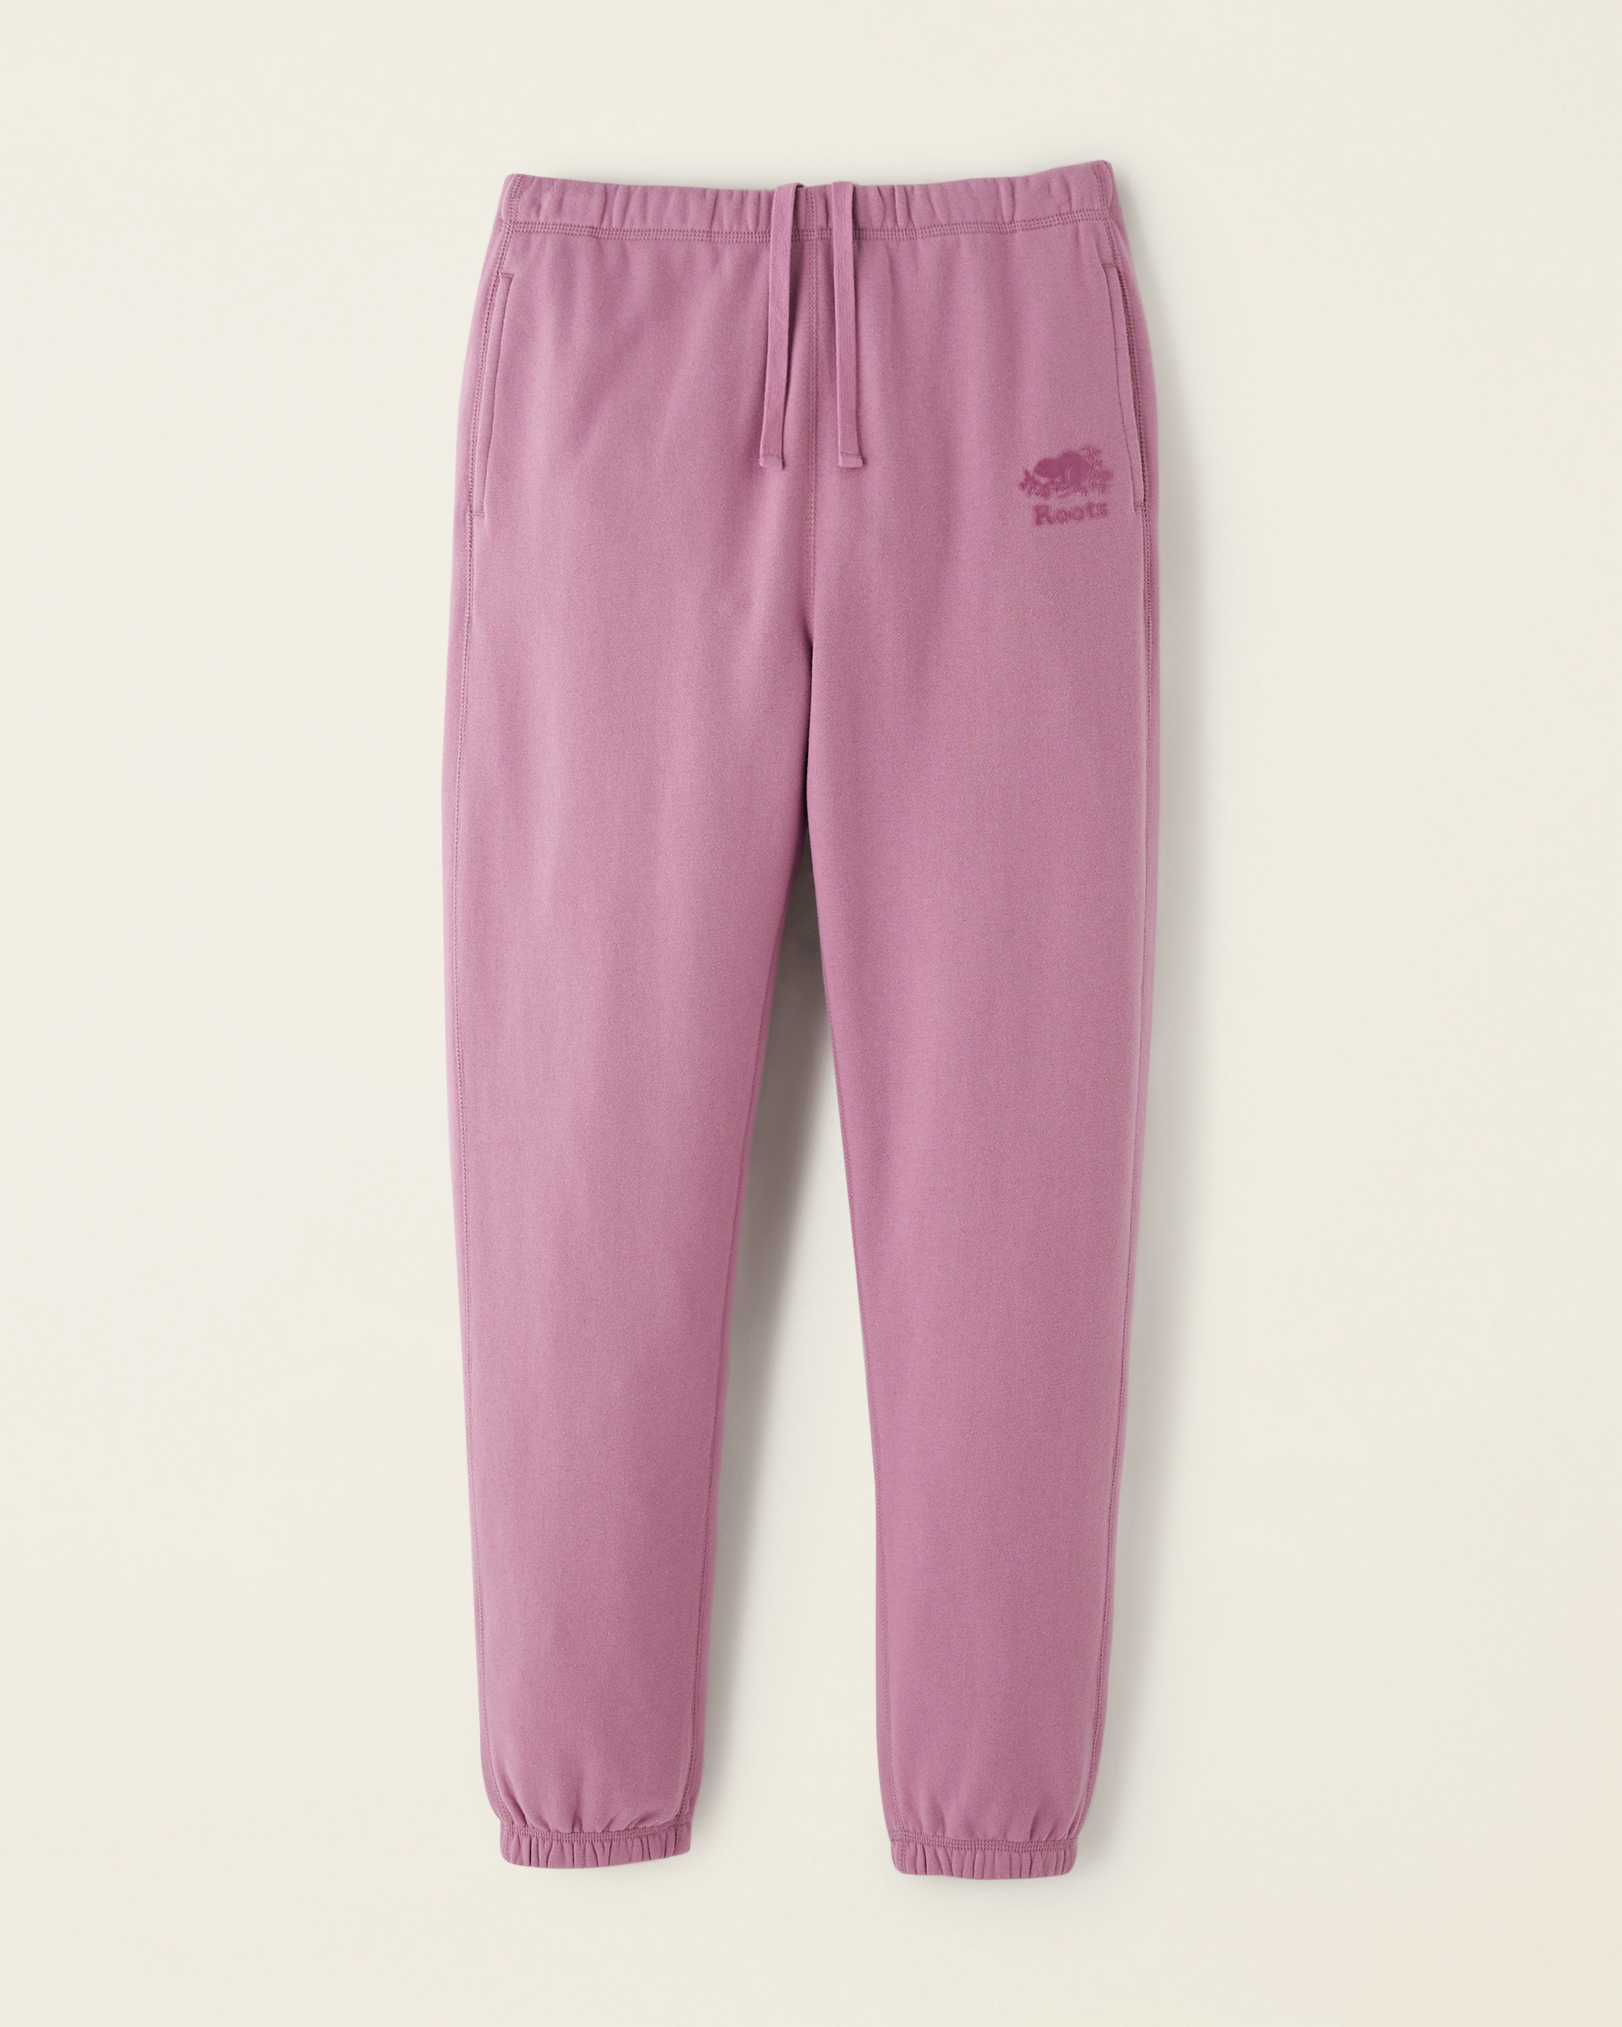 Roots Organic Cooper High Waisted Sweatpant in Orchid Haze